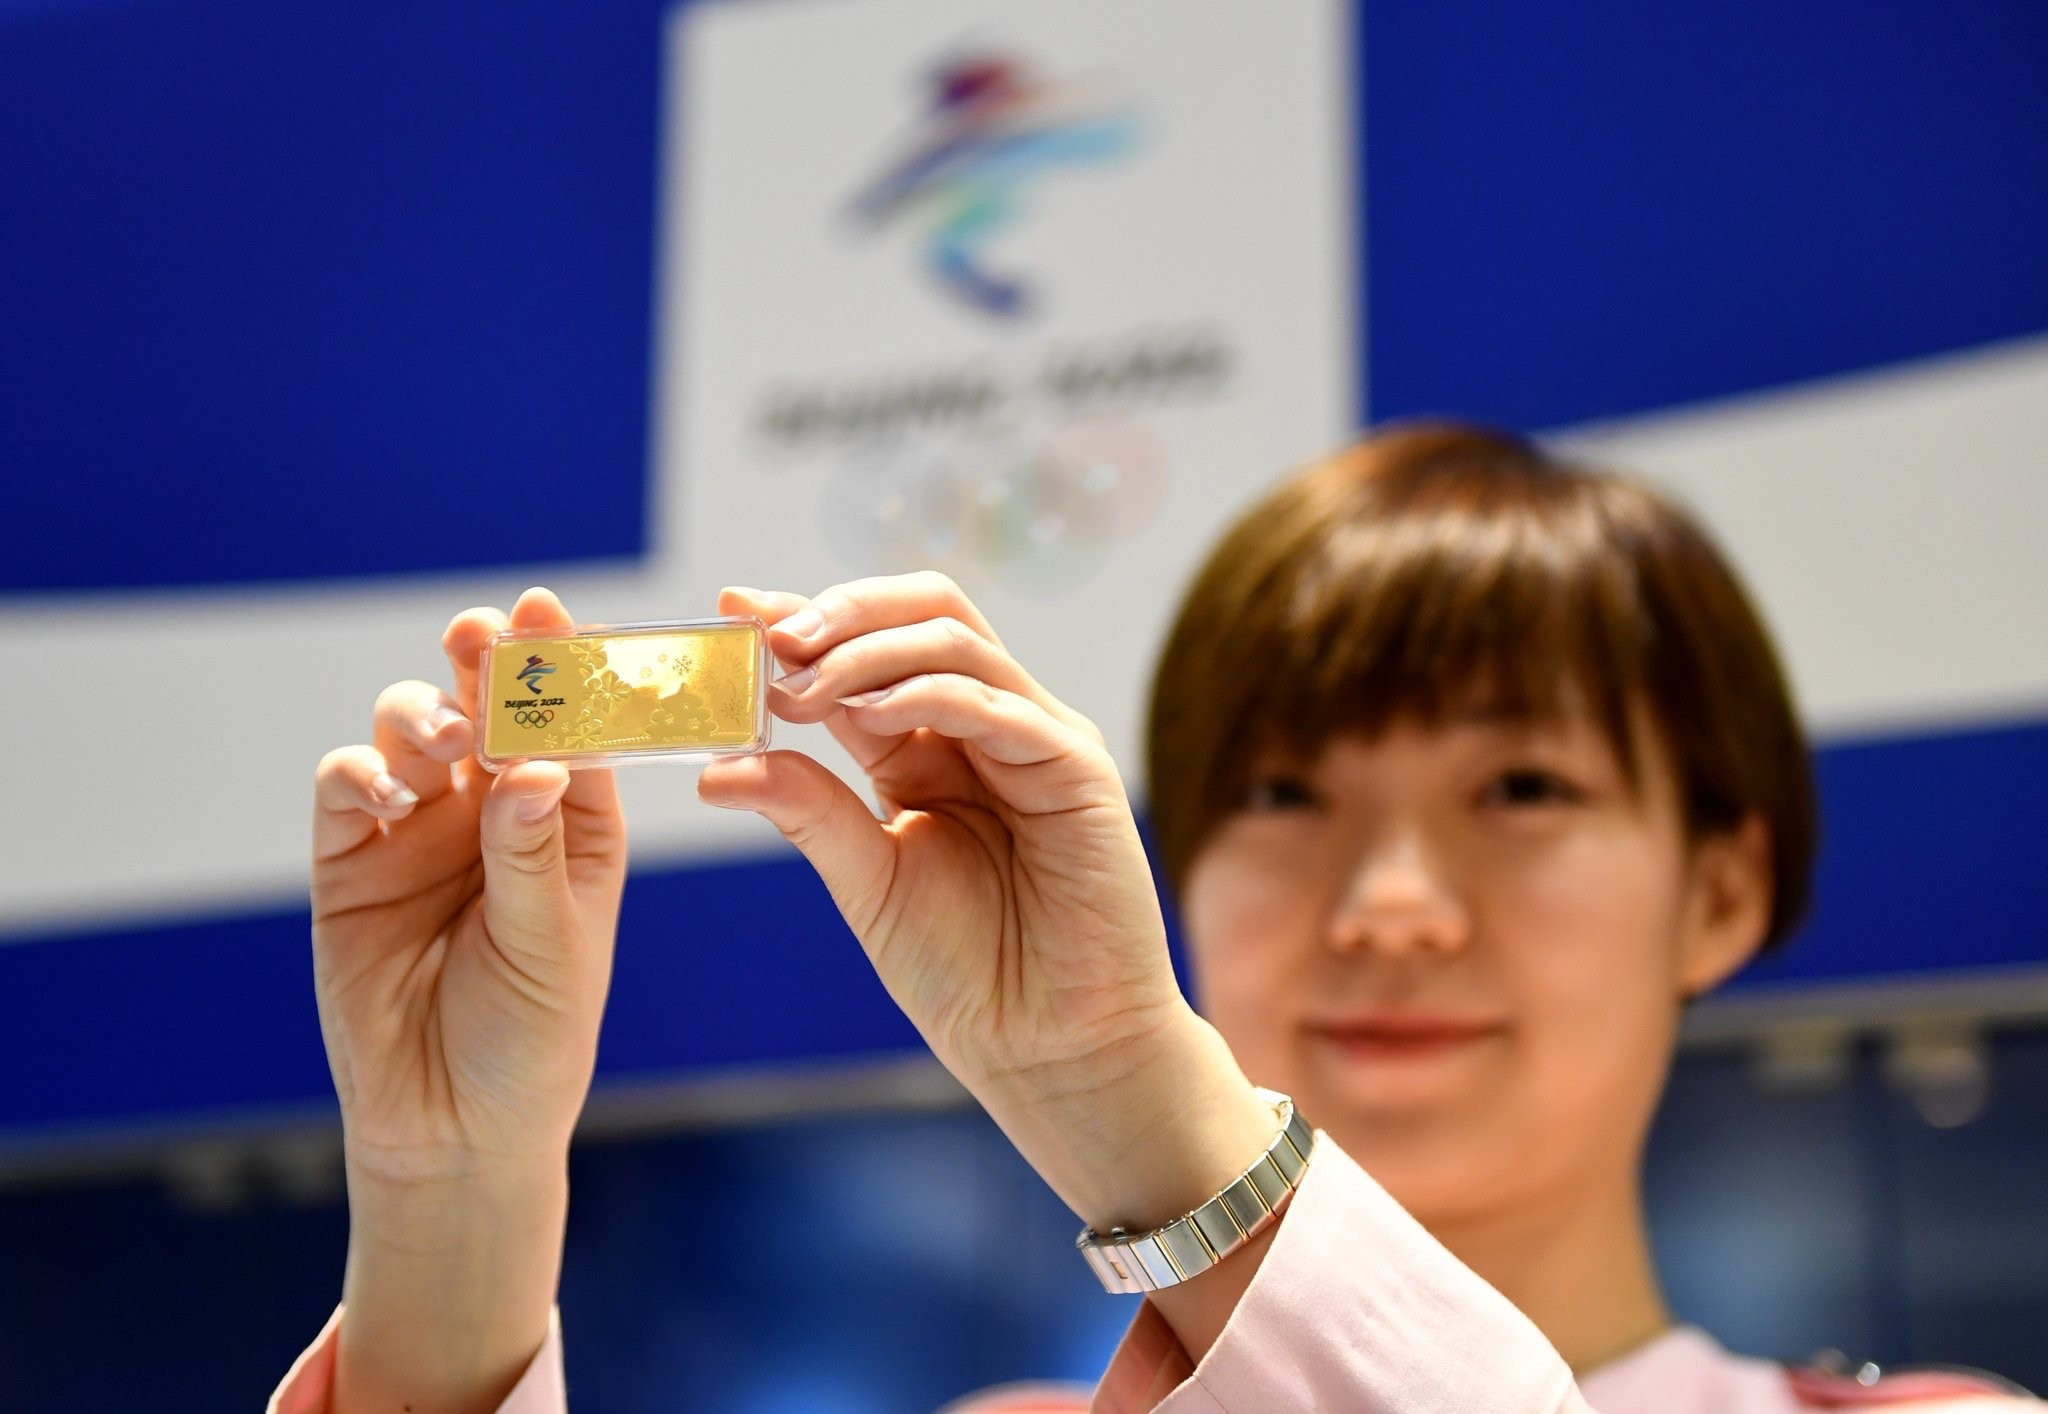 Beijing 2022 unveiled a series of commemorative gold bars ©Beijing 2022